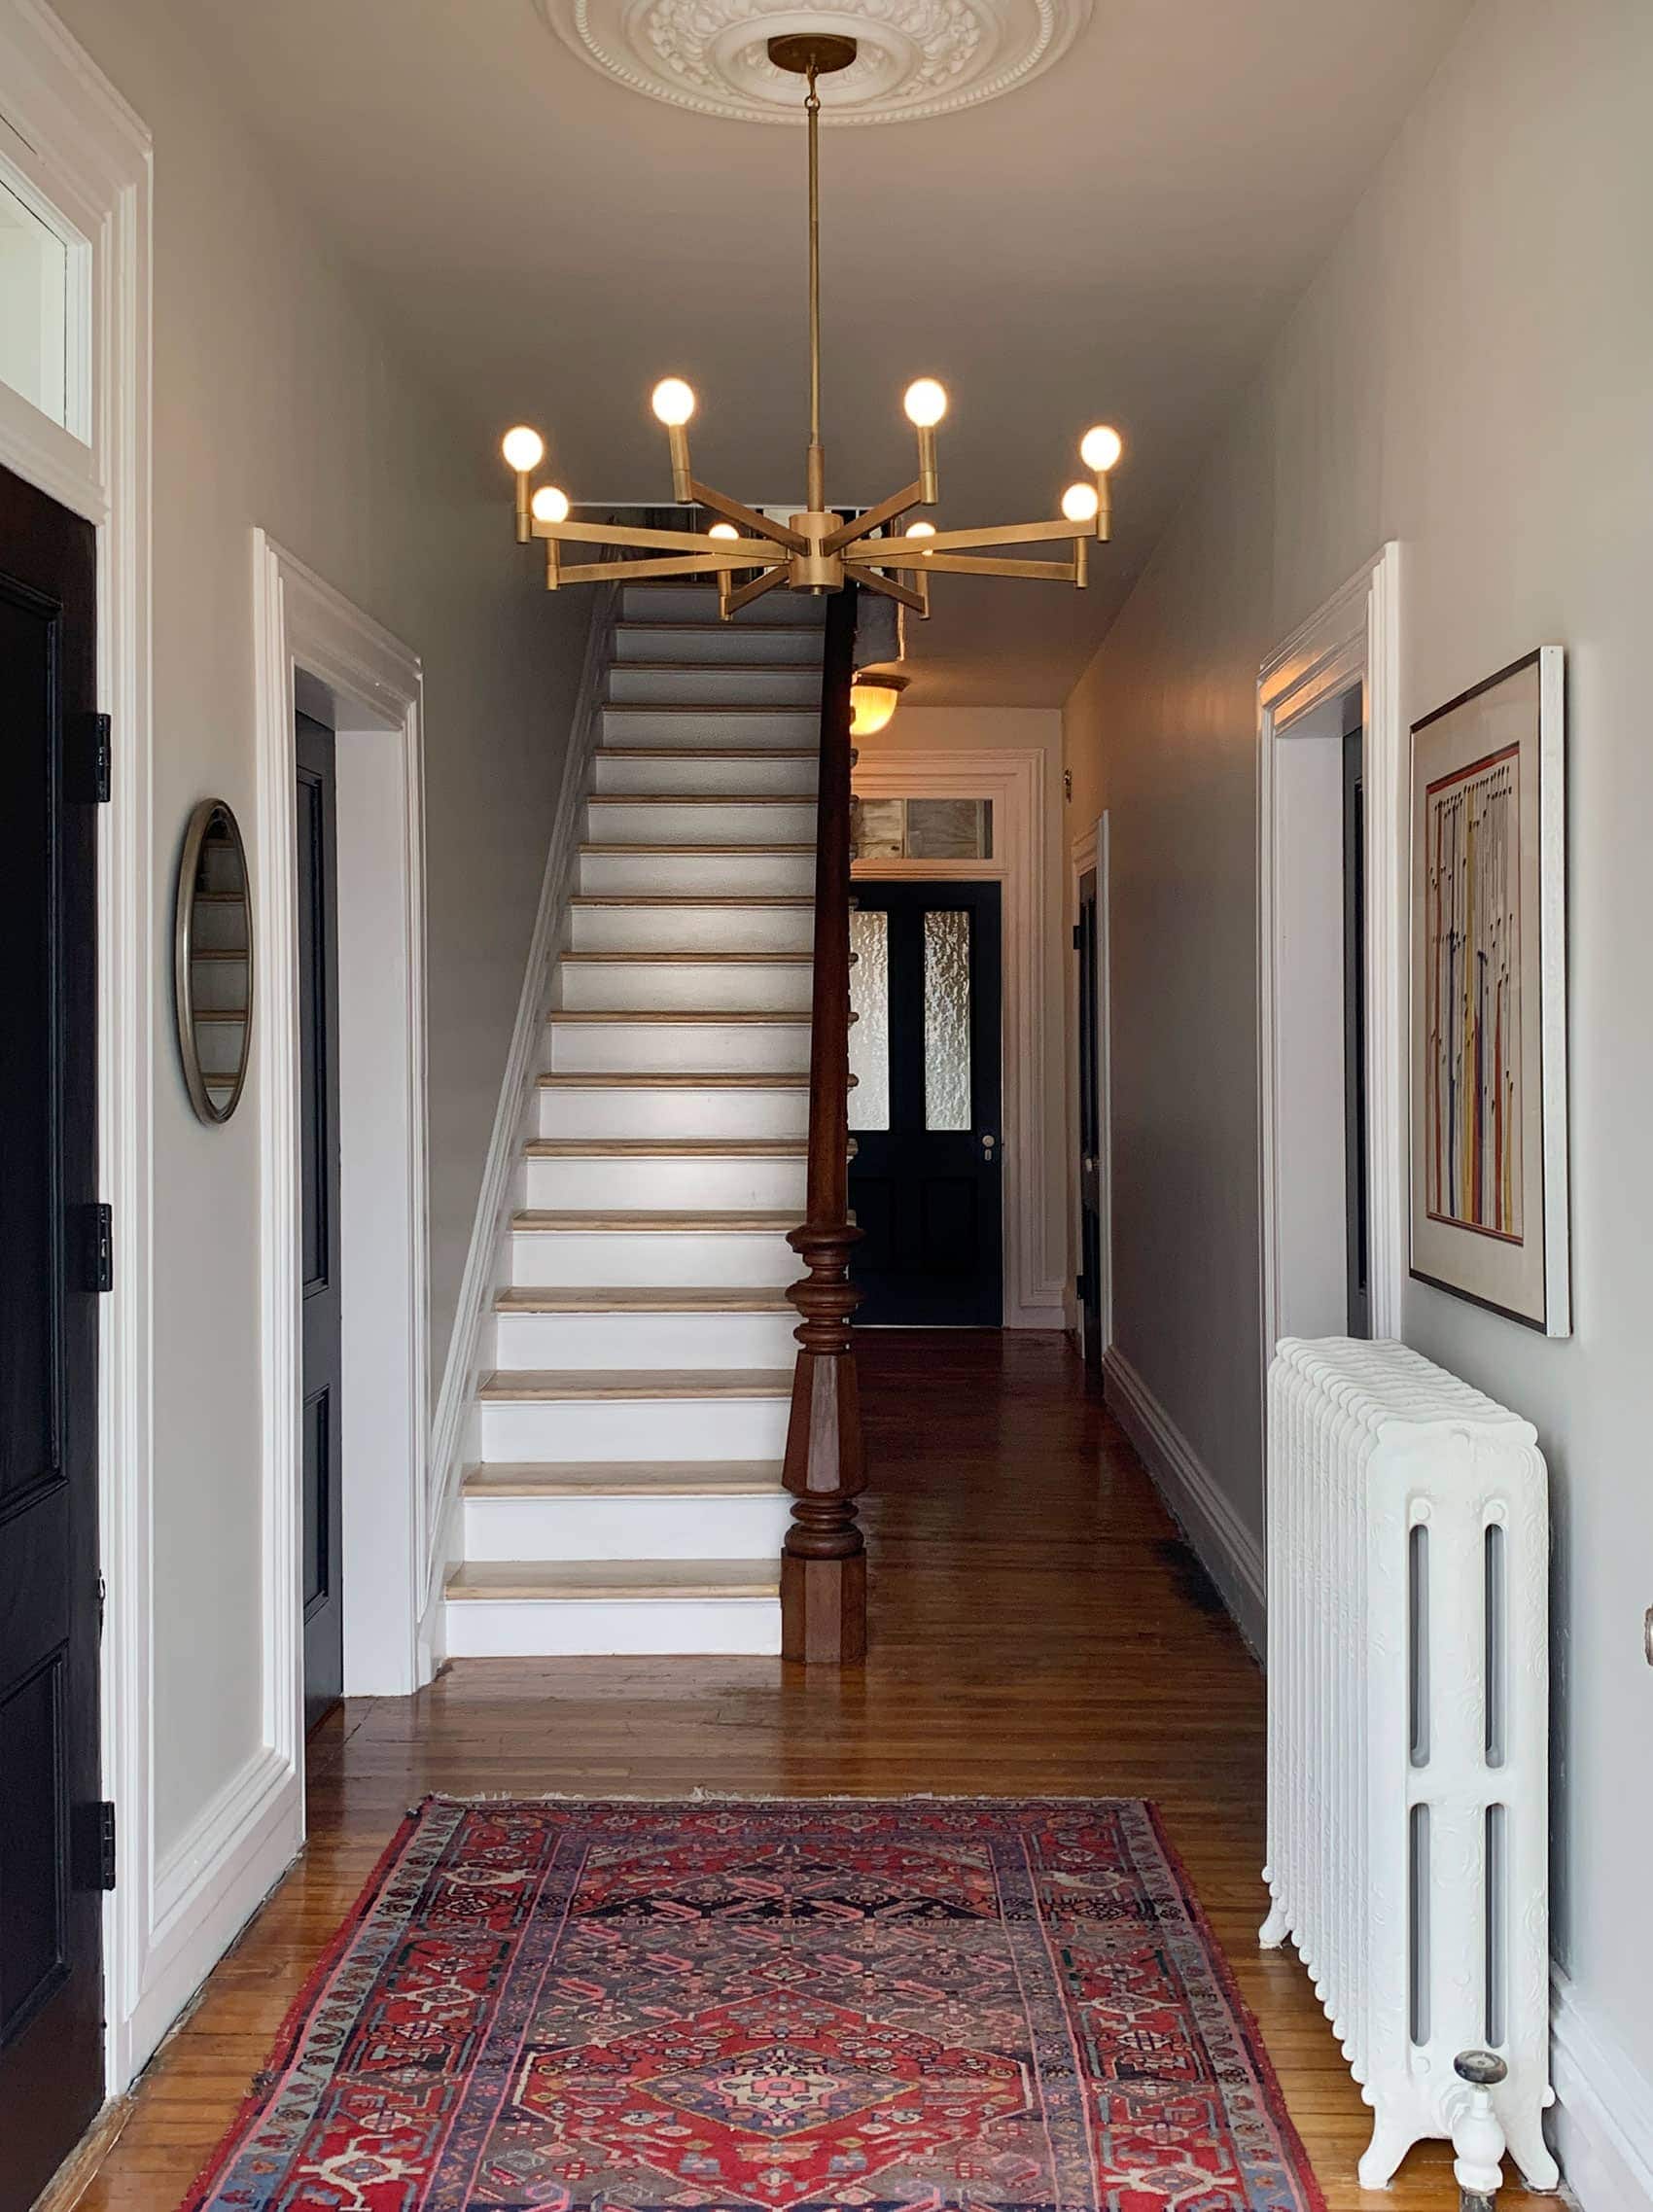 My Entryway and Stairs: The Big Reveal! | Daniel Kanter